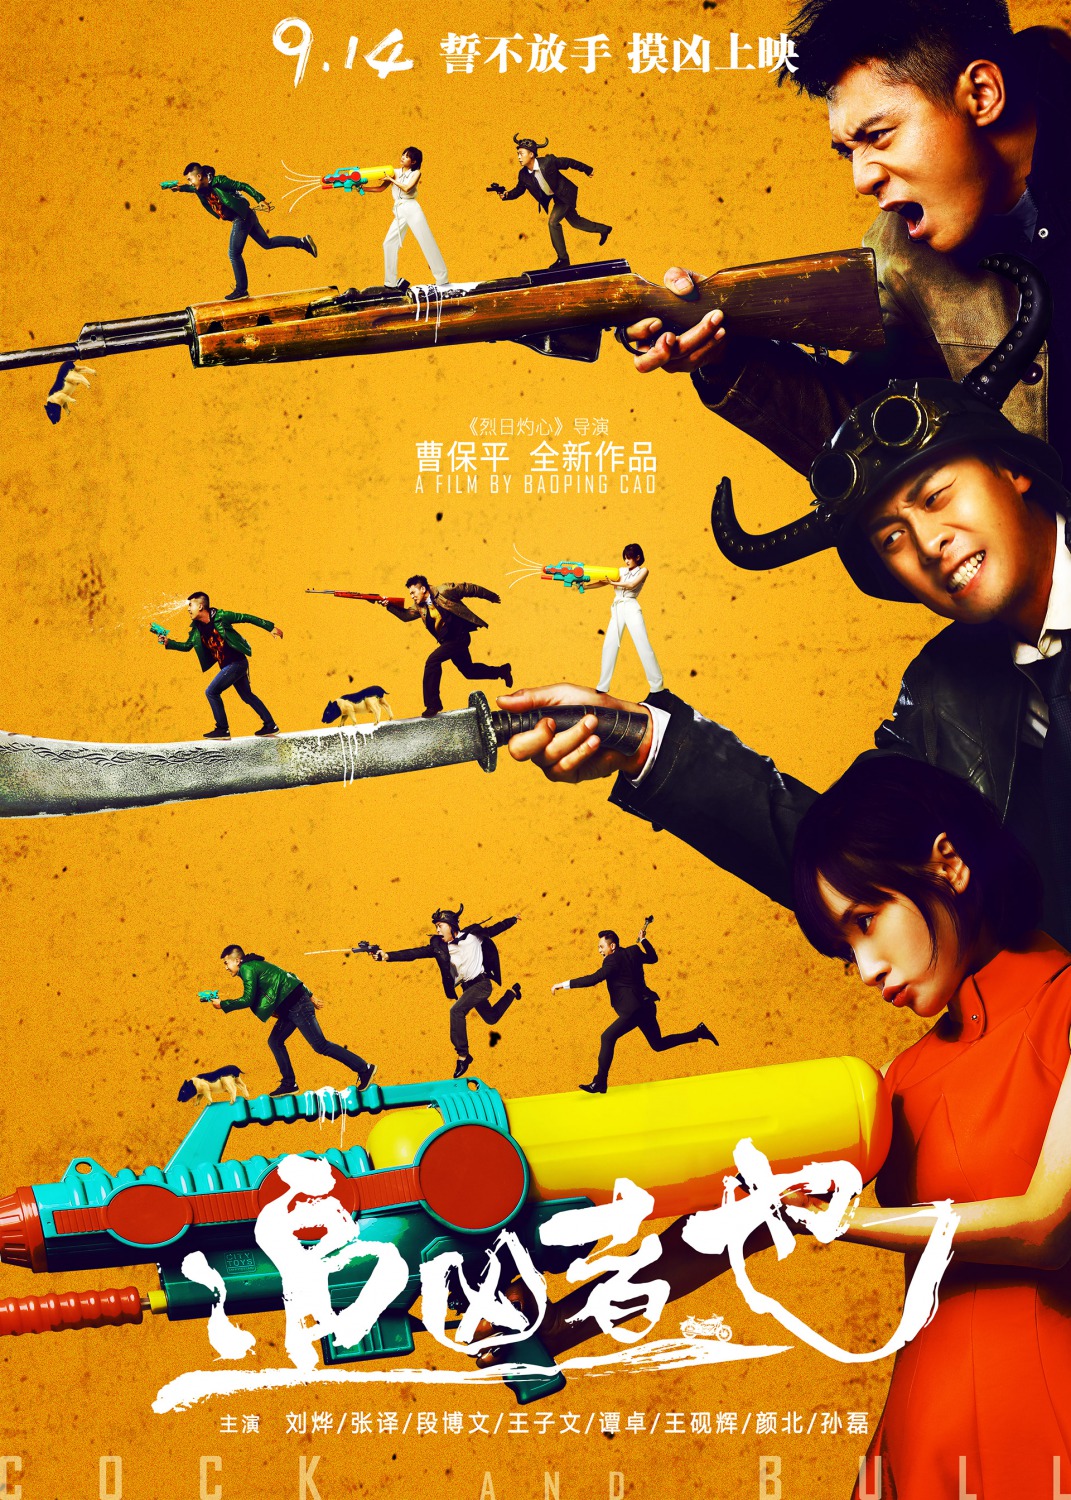 Extra Large Movie Poster Image for Zhui xiong zhe ye (#6 of 16)